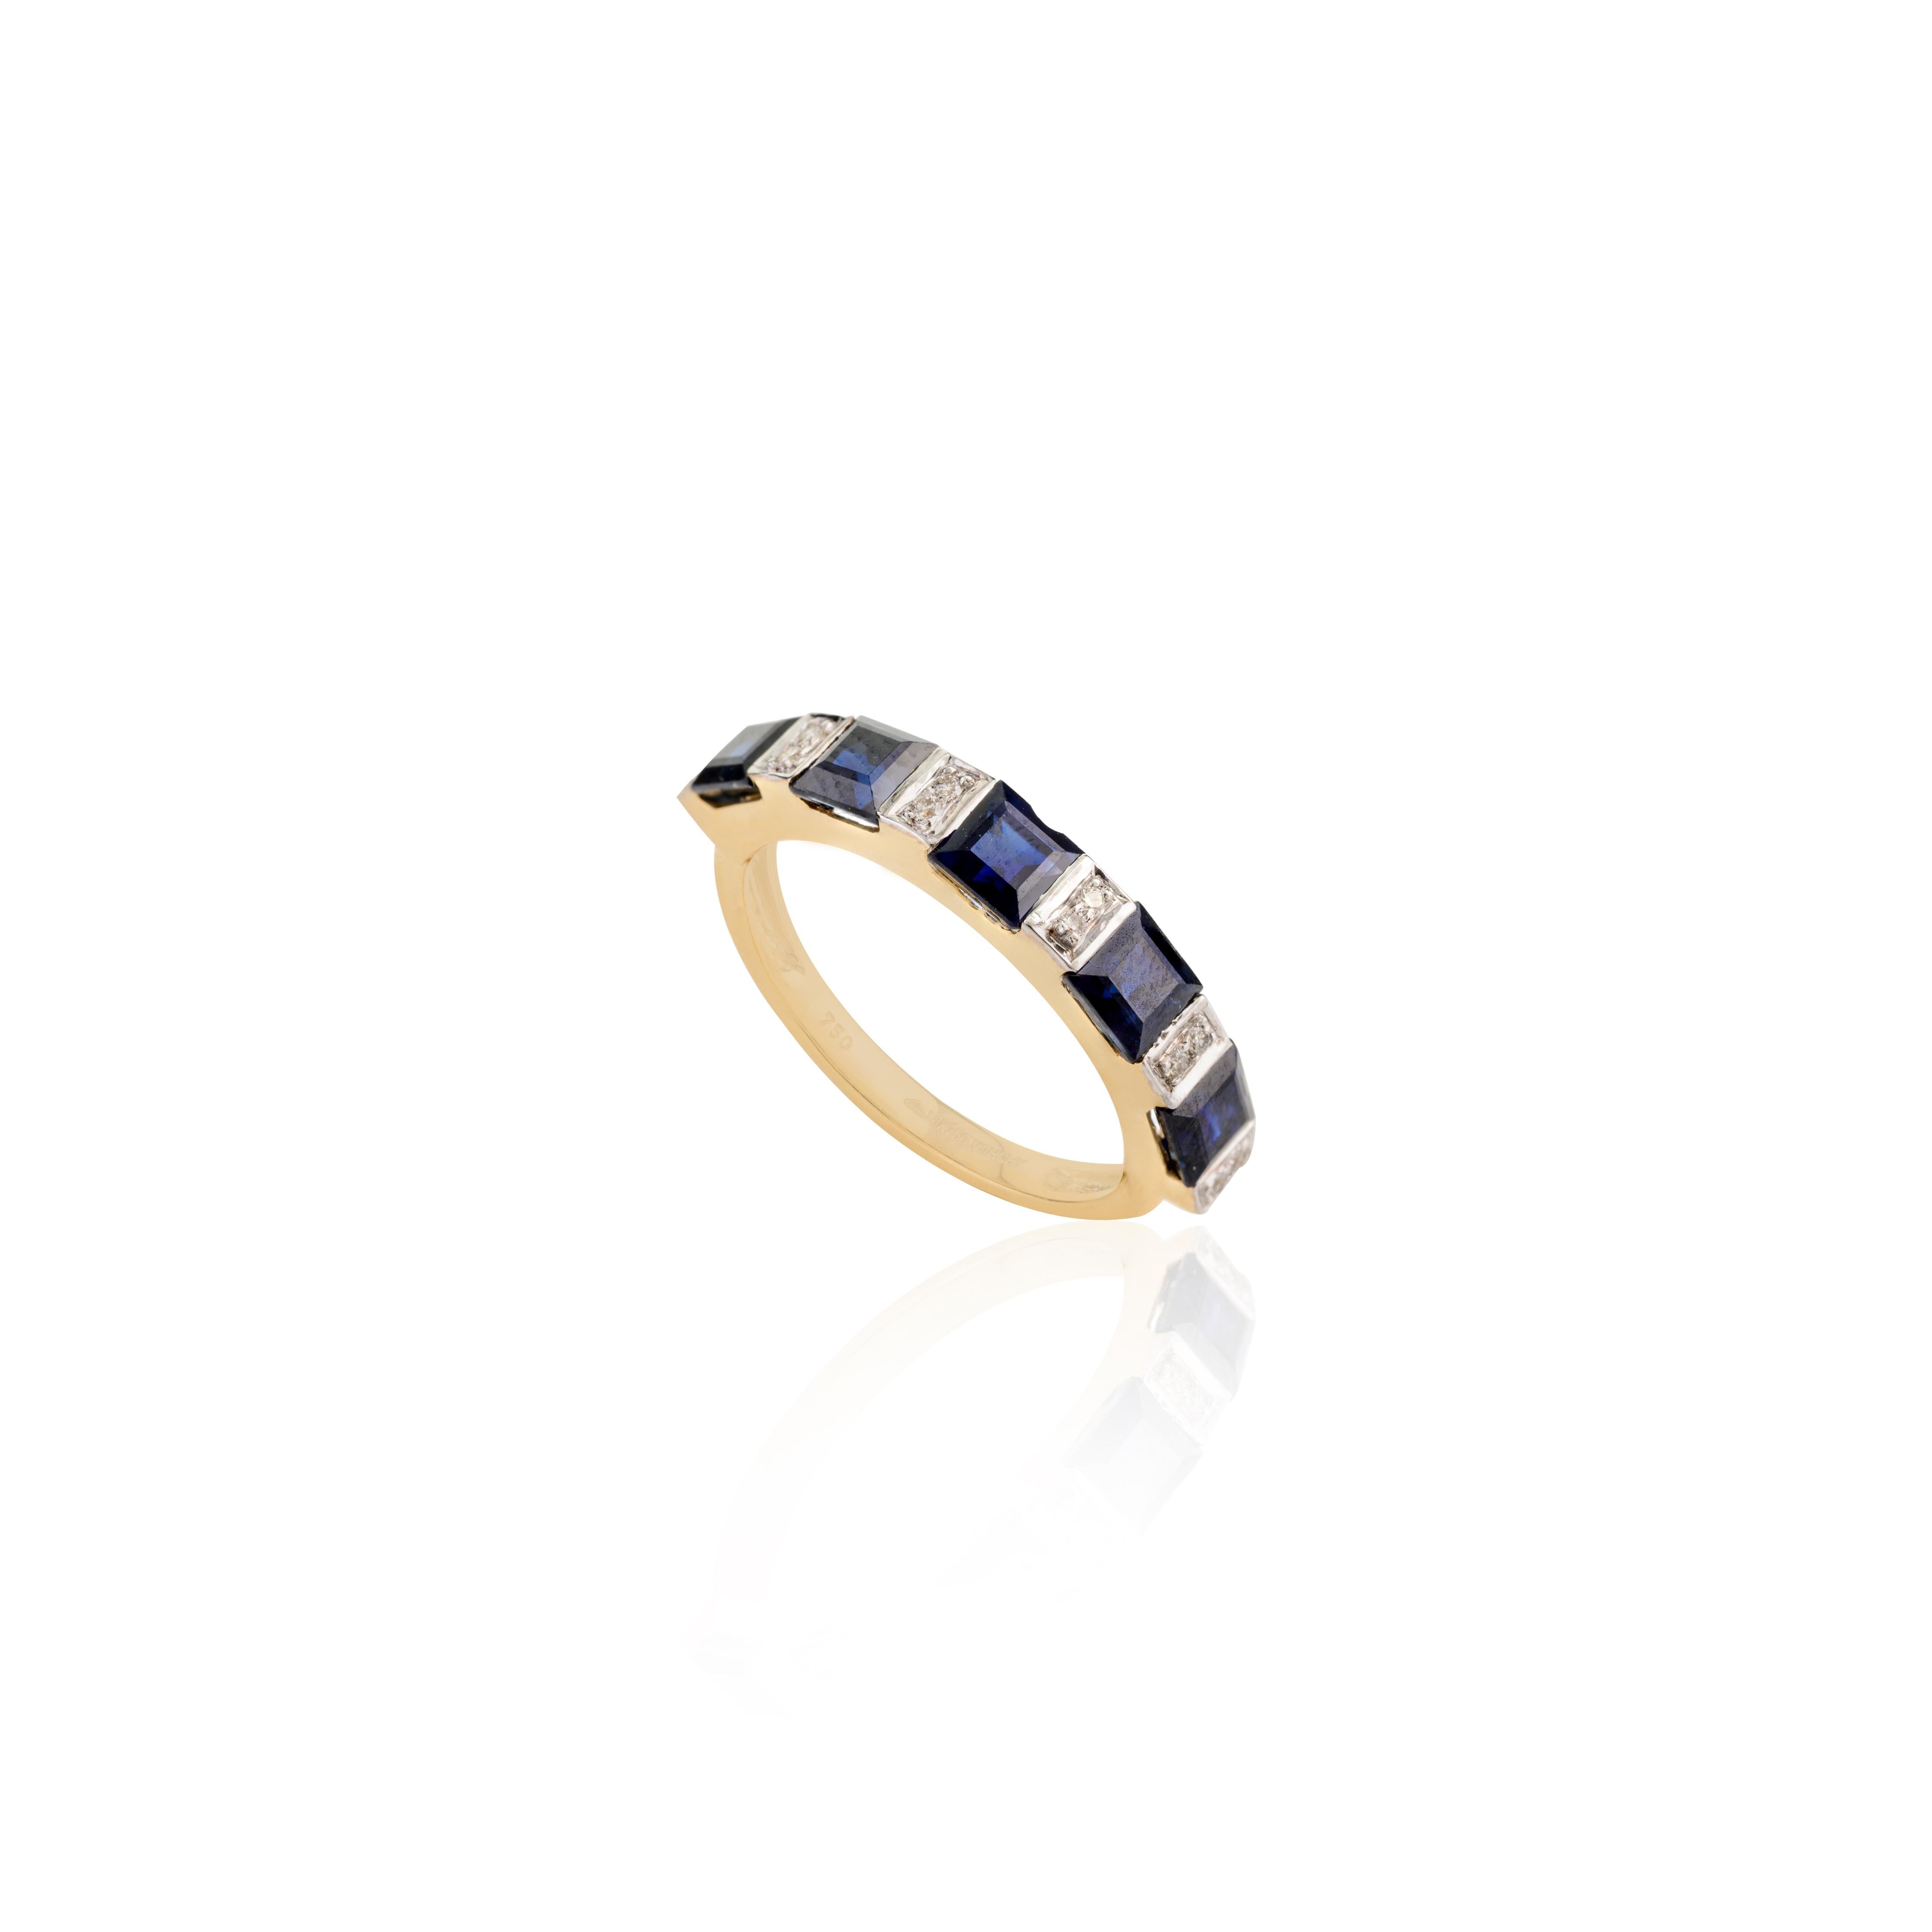 For Sale:  Fine Square Cut Blue Sapphire and Diamond Engagement Band Ring 18k Yellow Gold 4